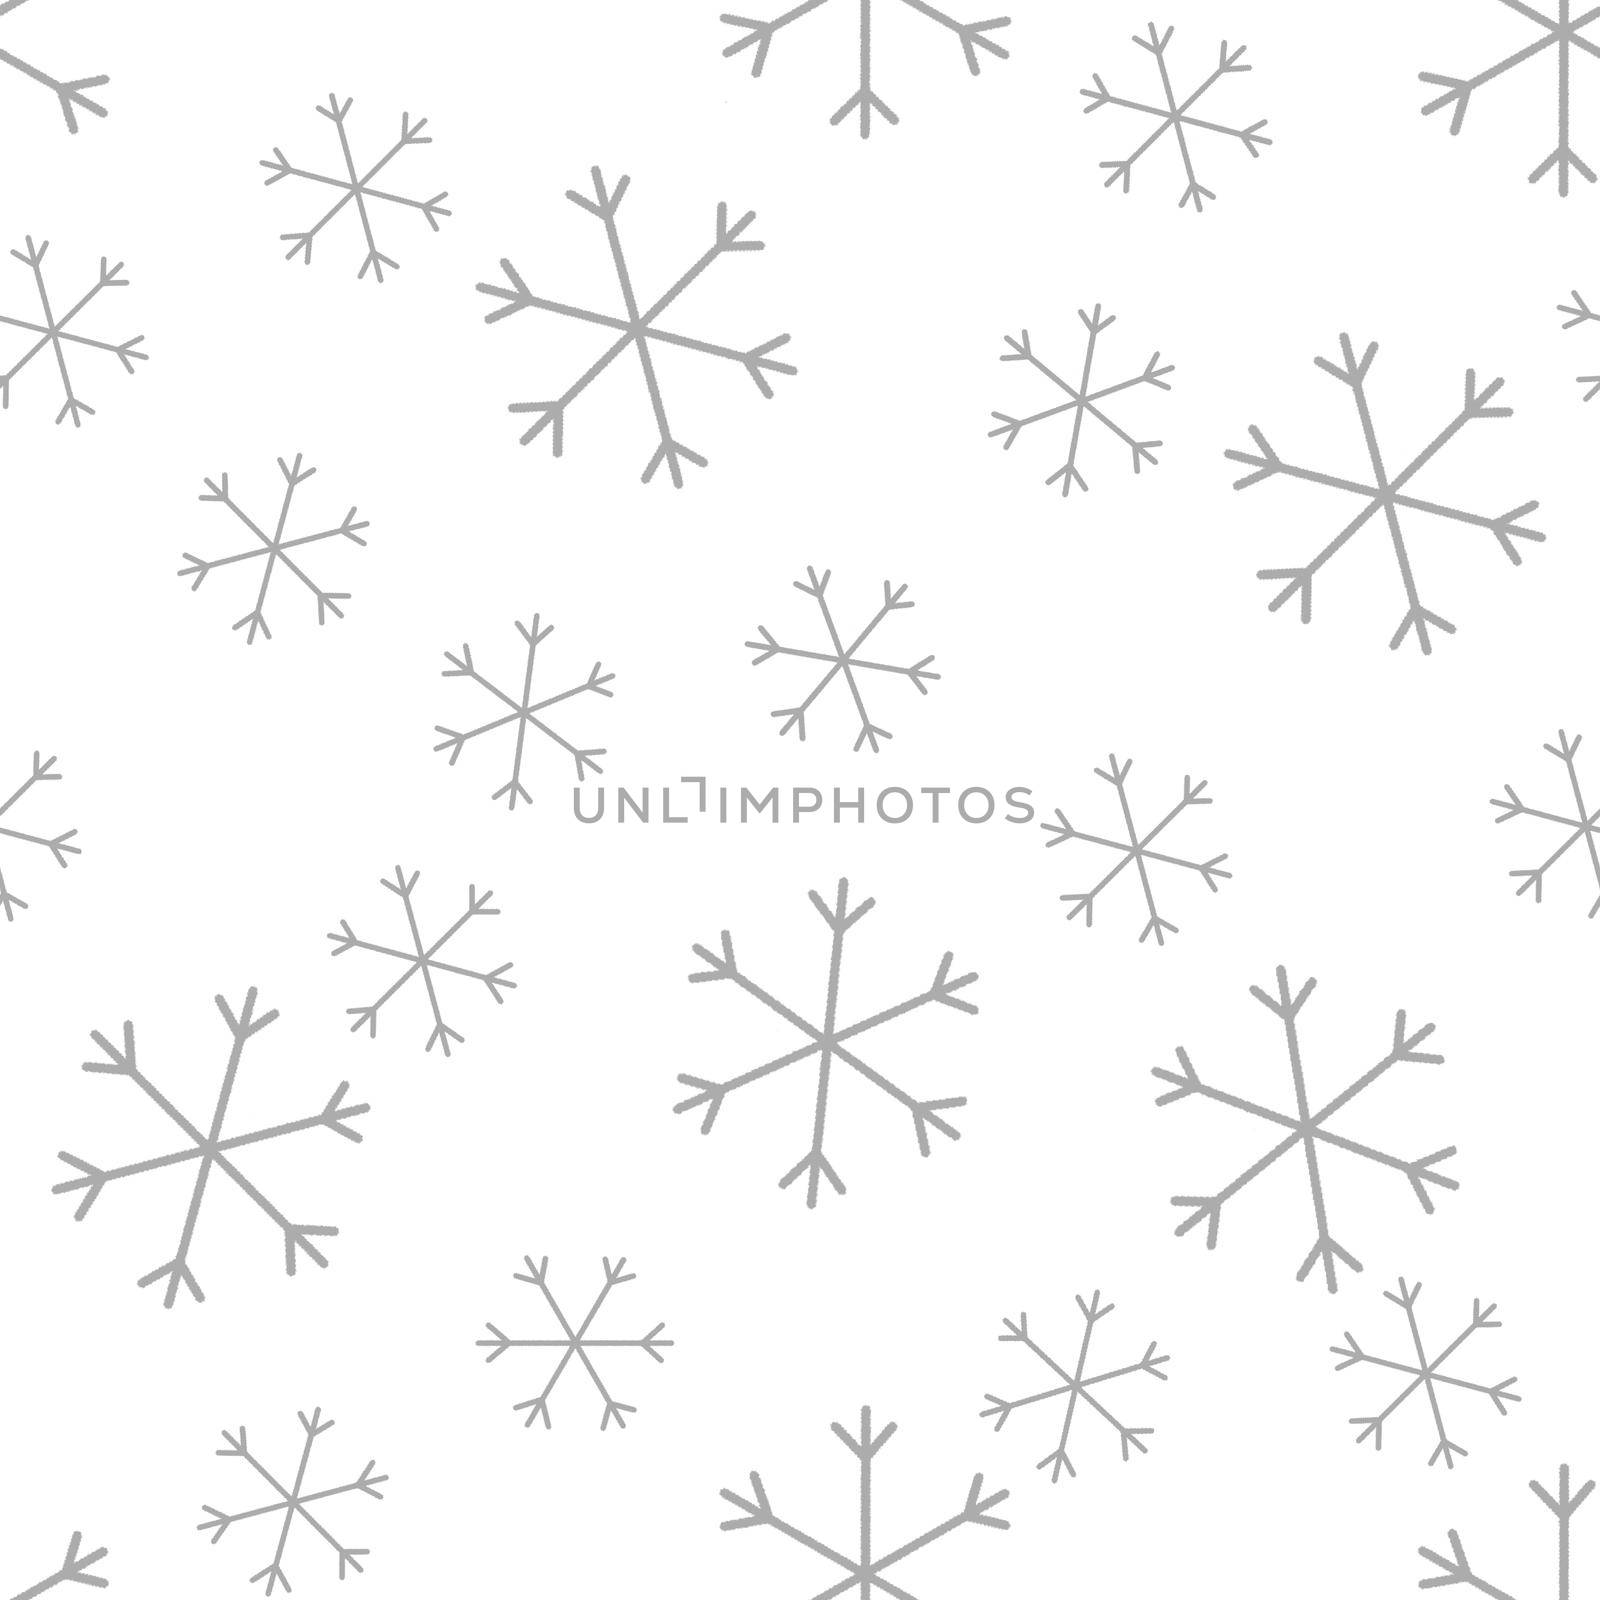 Seamless Christmas pattern doodle with hand random drawn snowflakes.Wrapping paper for presents, funny textile fabric print, design, decor, food wrap, backgrounds. new year.Raster copy.White gray